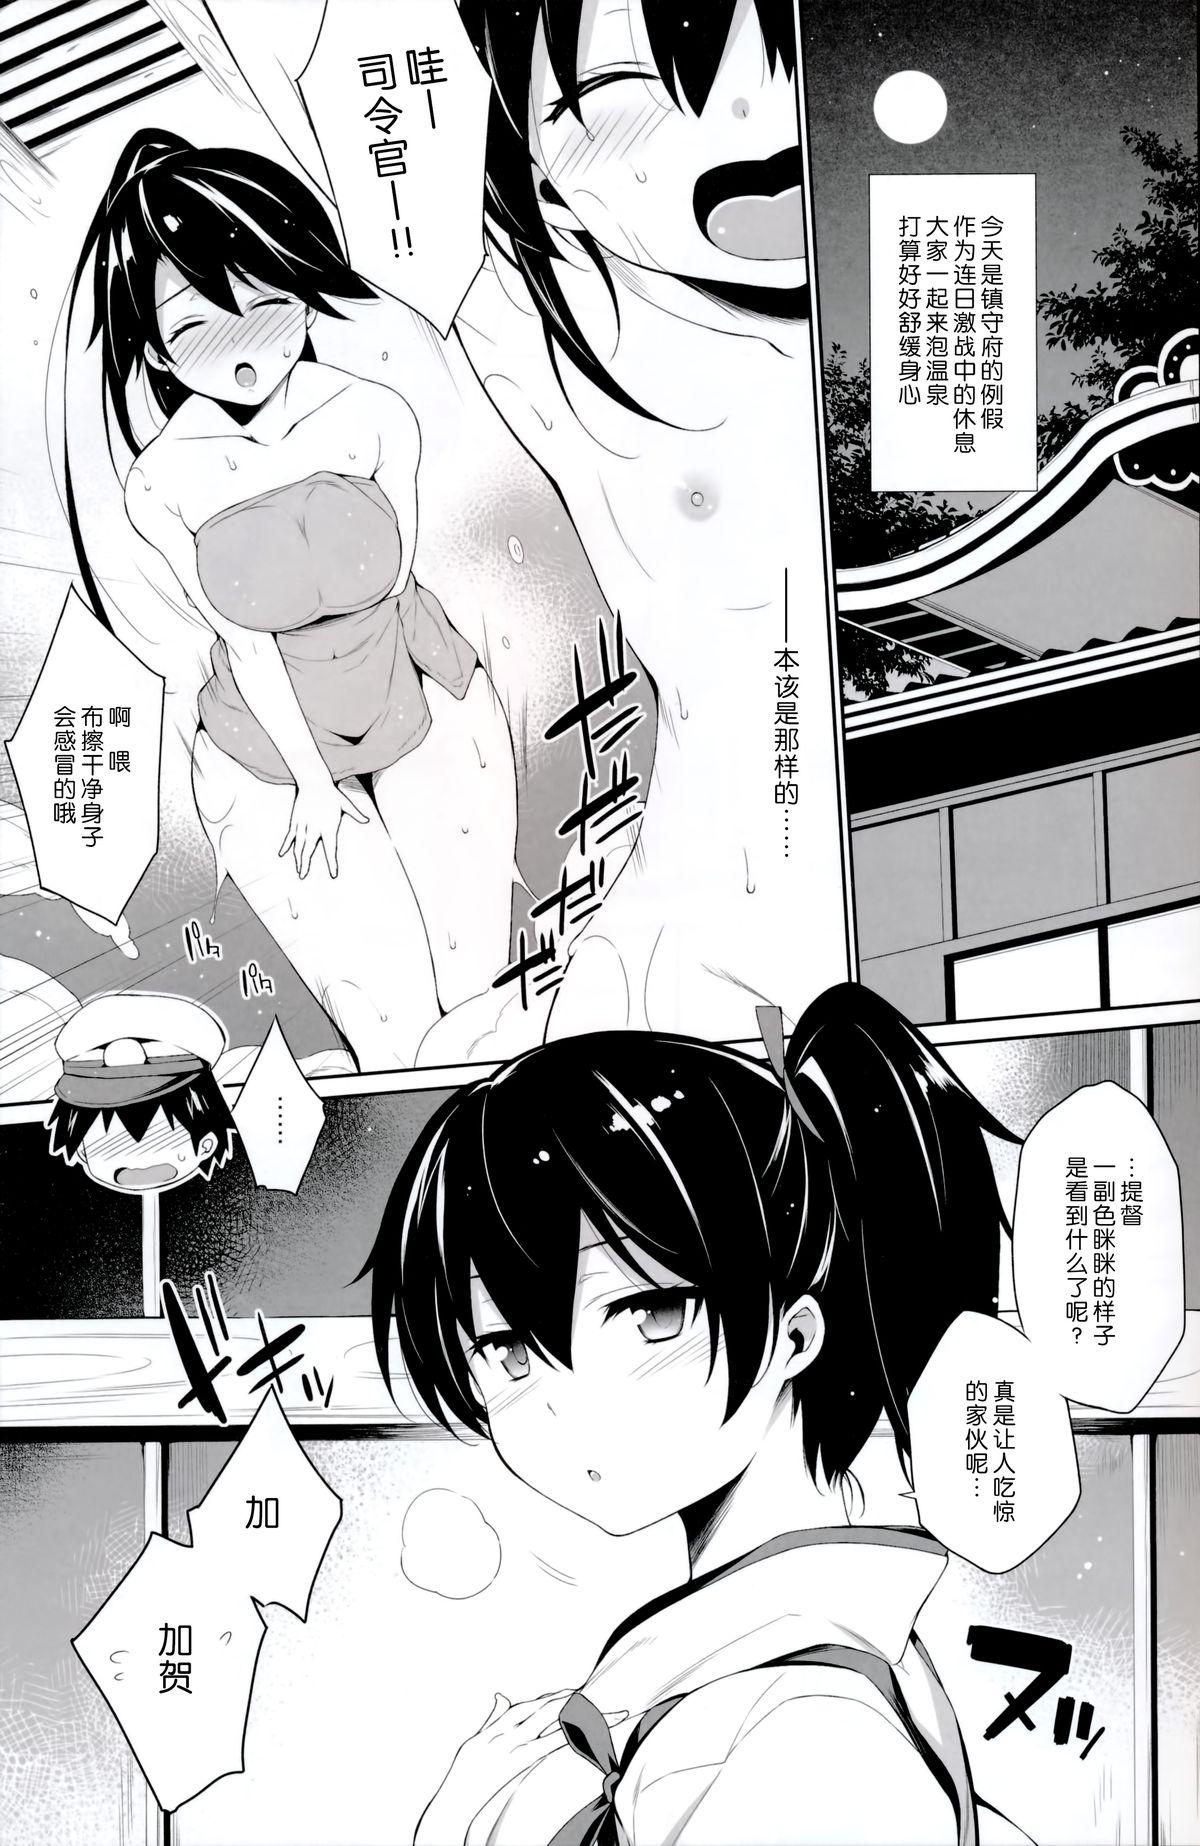 Threesome Platonic syndrome - Kantai collection Alt - Page 6